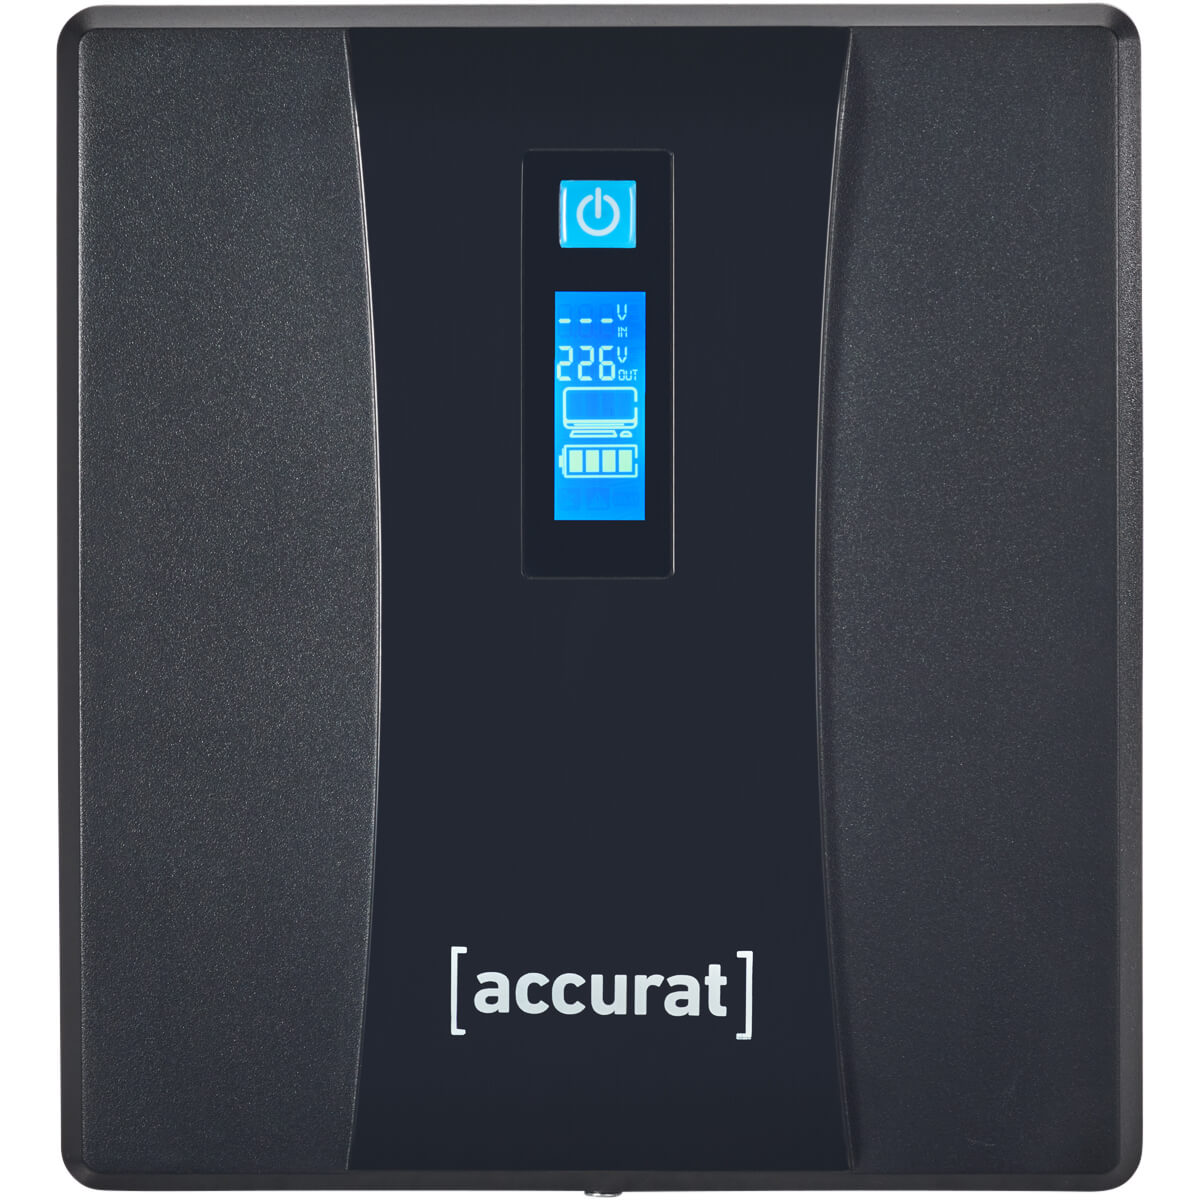 Accurat SHIELD 1000 FrontView 